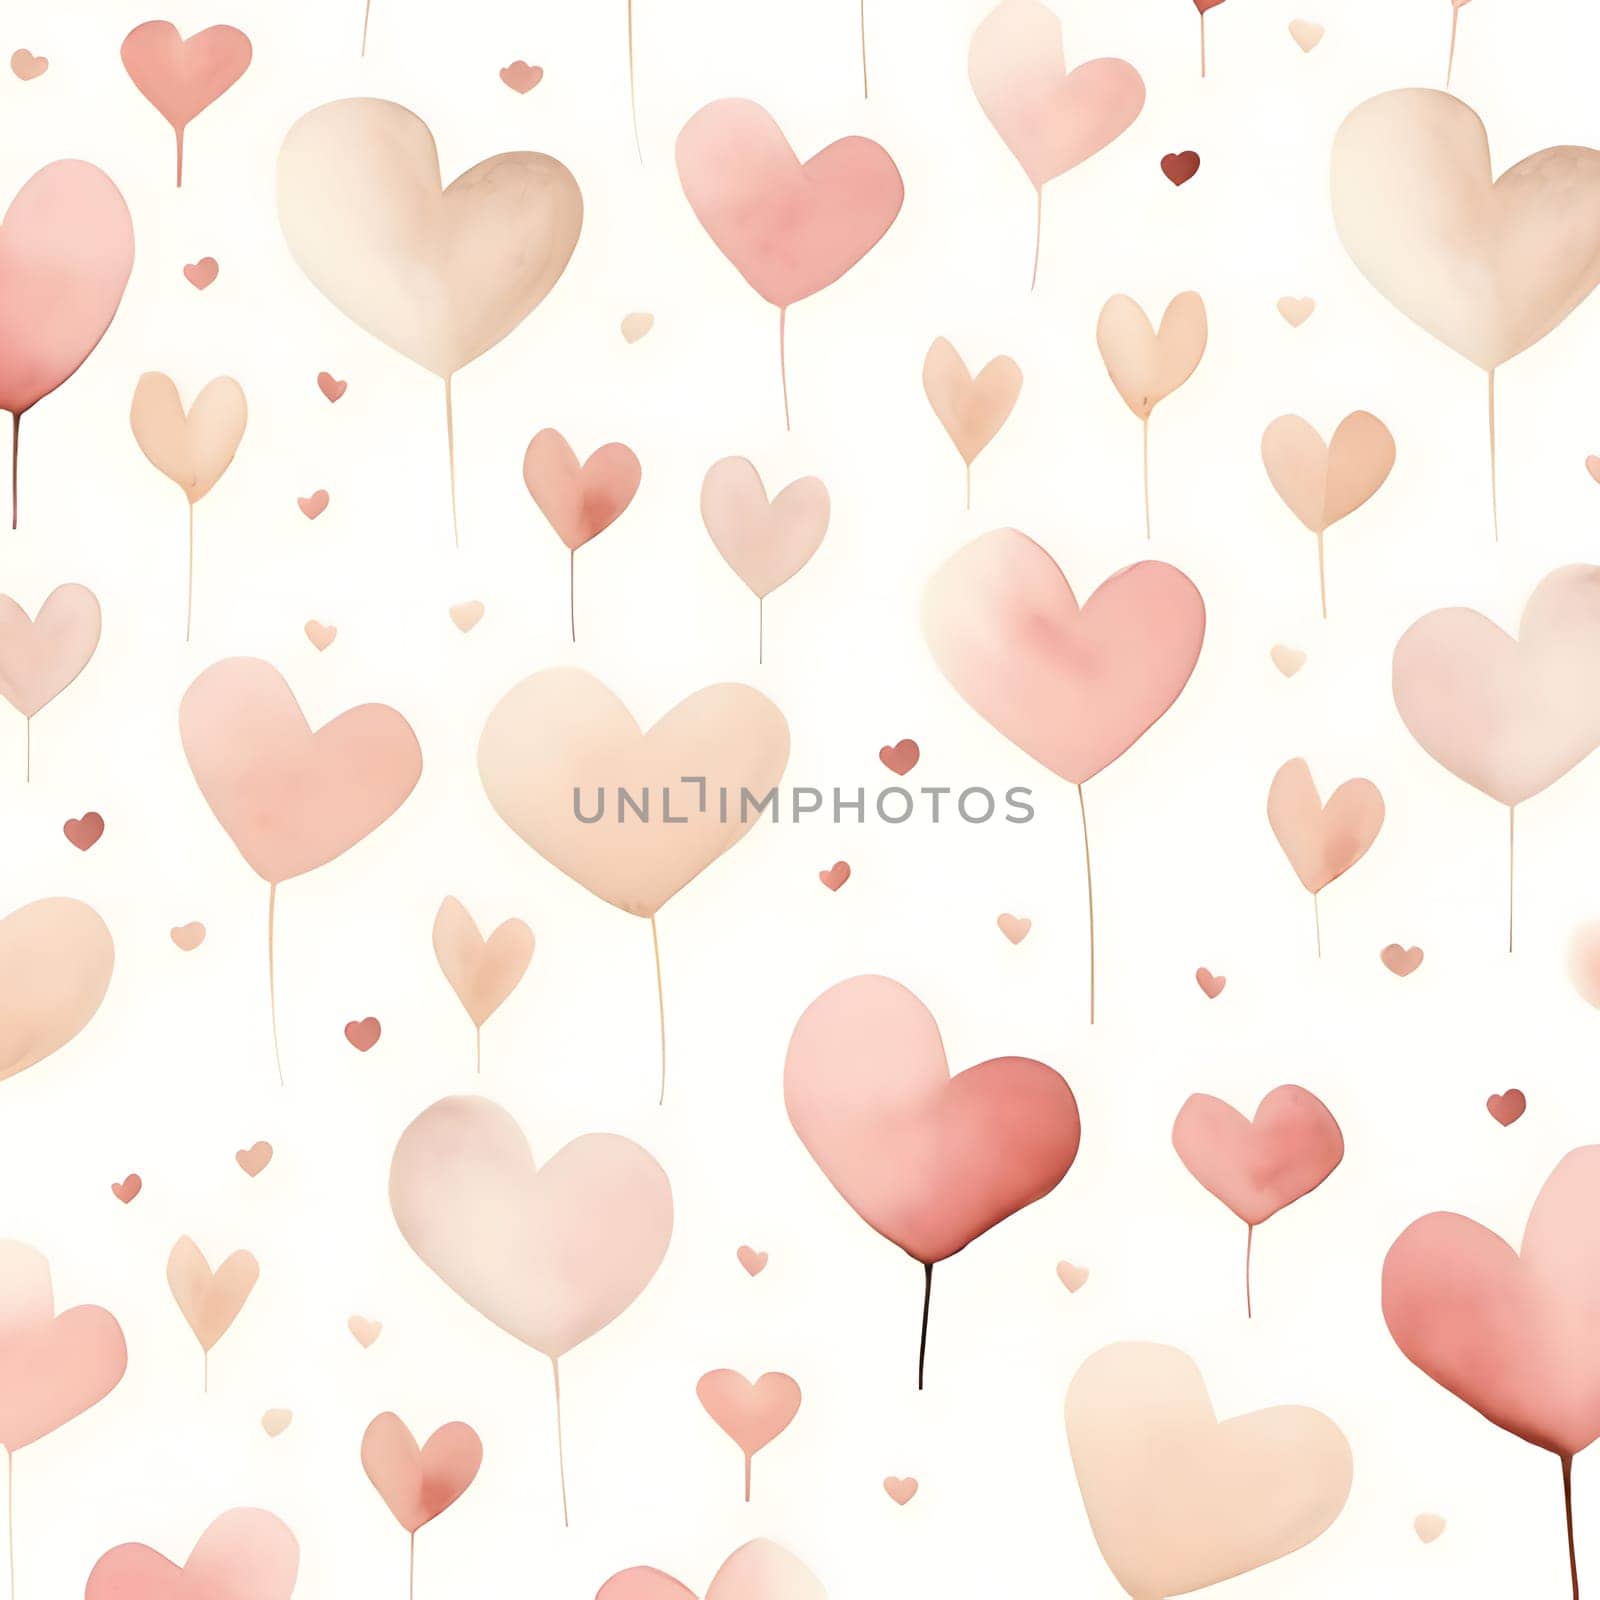 Patterns and banners backgrounds: Seamless pattern with watercolor hearts on a white background.